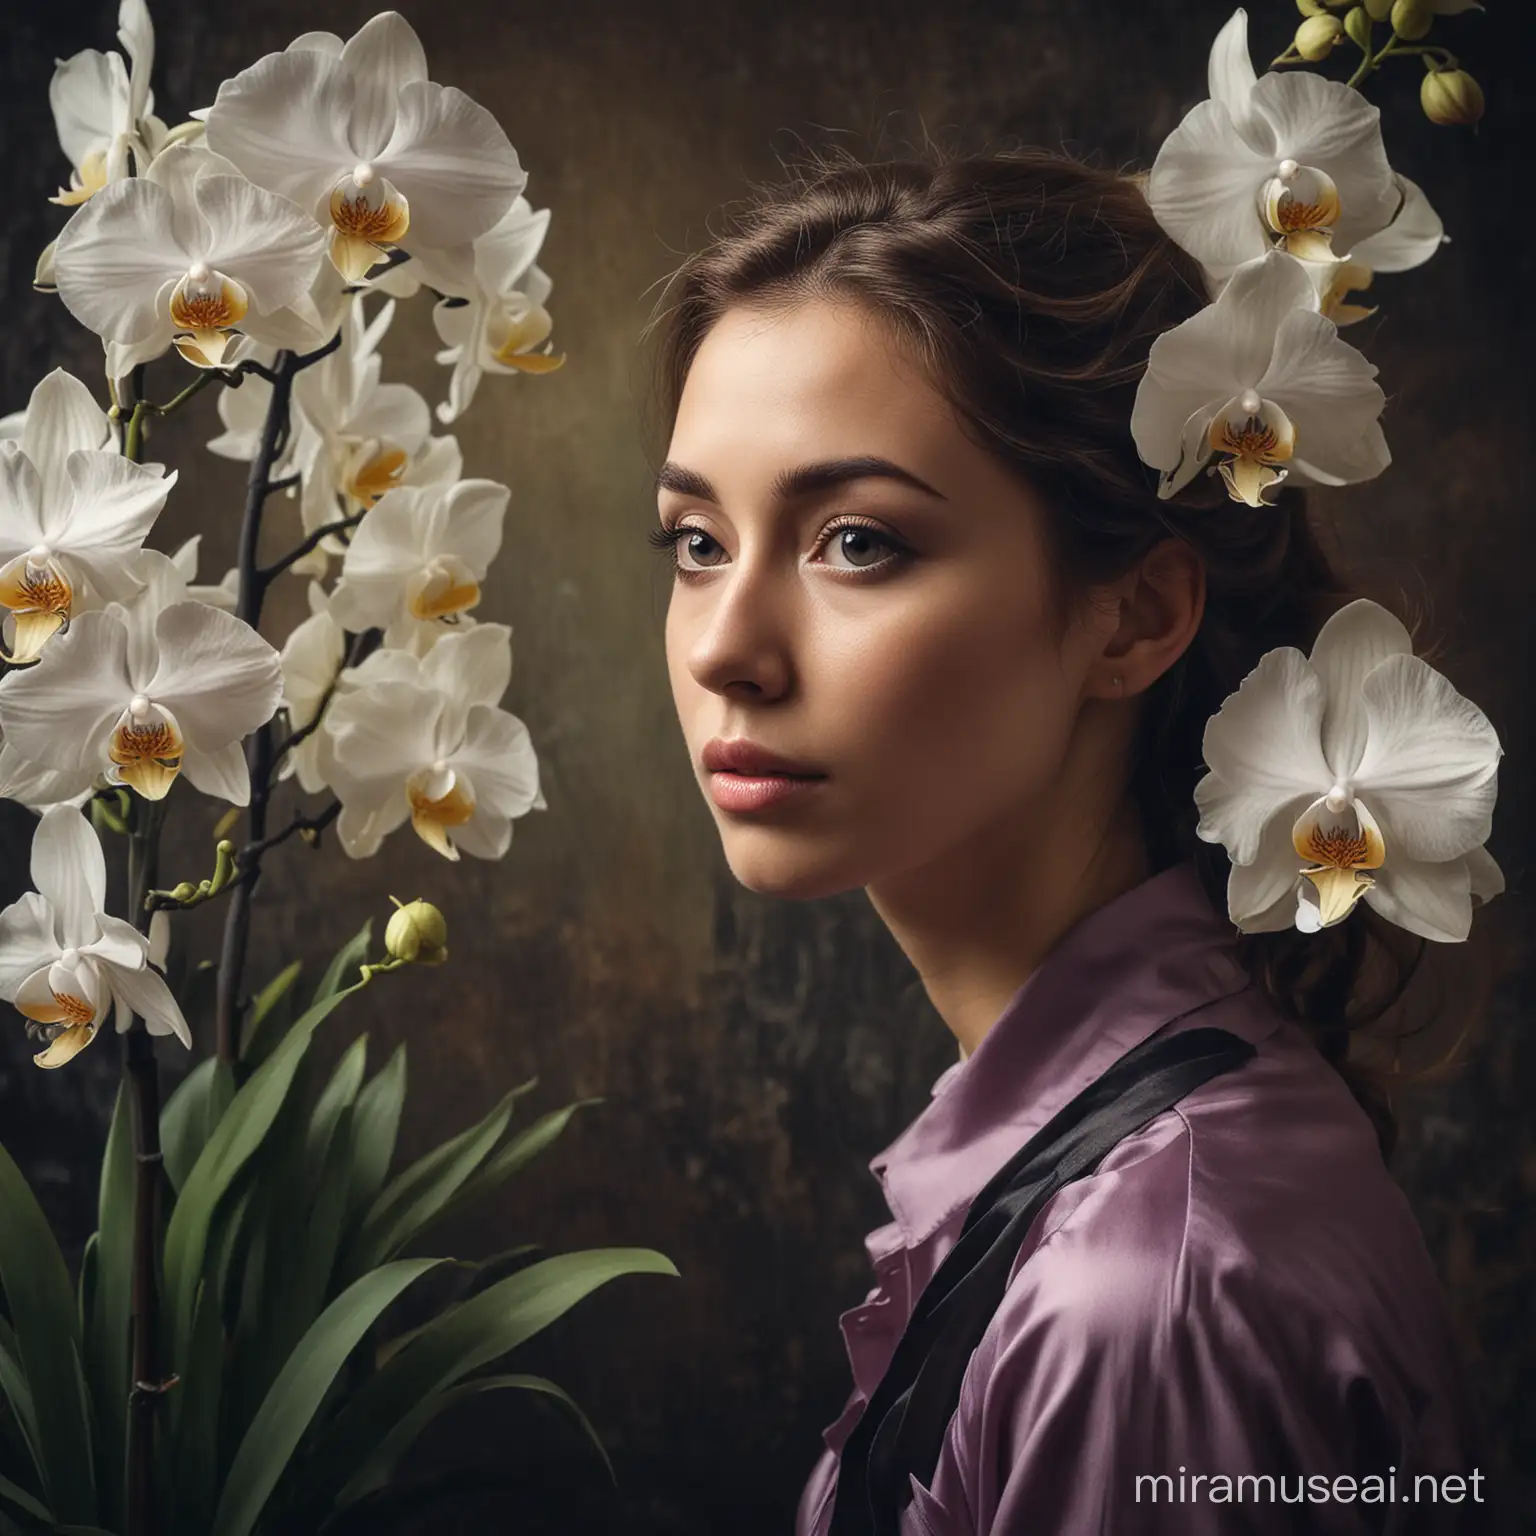 Dramatic Portrait of SidewaysTurned Young Woman Amid Orchids